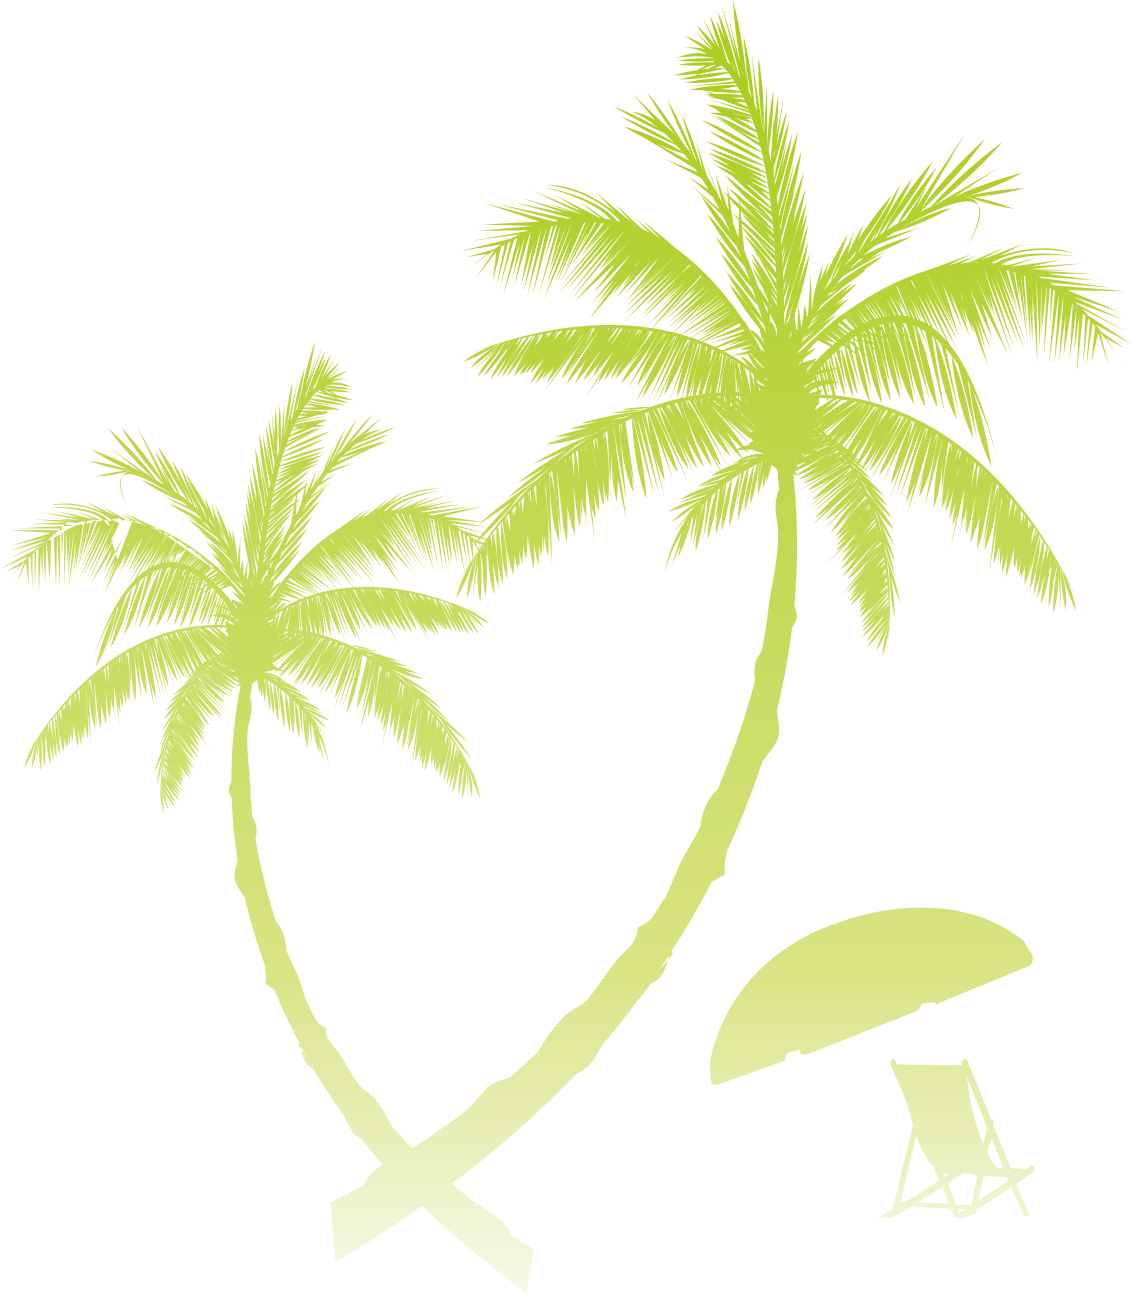 Sunset clipart coconut tree, Sunset coconut tree Transparent FREE for